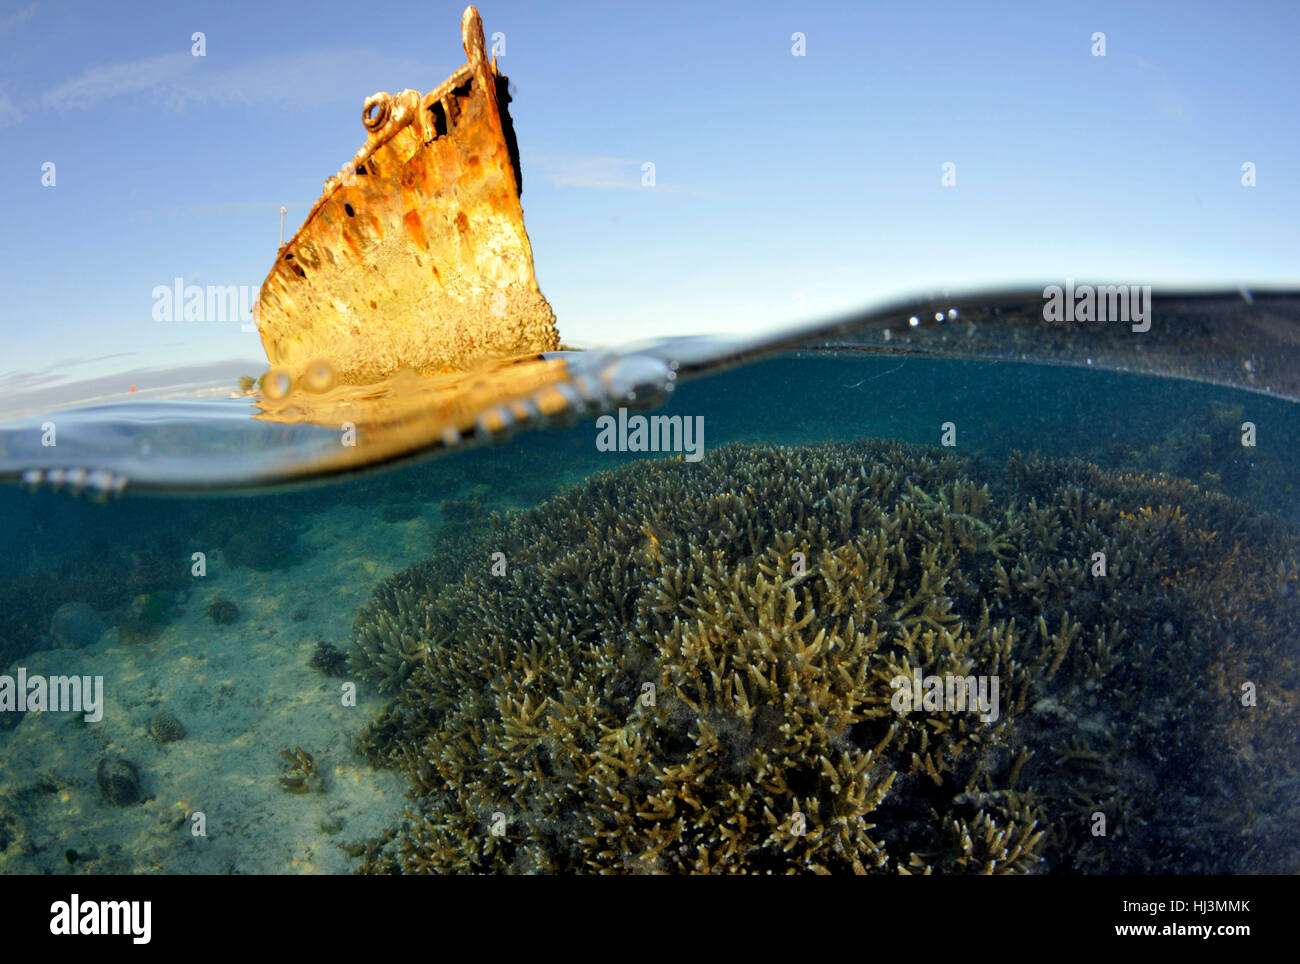 Shallow staghorn coral head, Acropora sp., and HMAS Protector shipwreck, dragged to Heron Island in 1945, Great Barrier Reef, Queensland, Australia Stock Photo